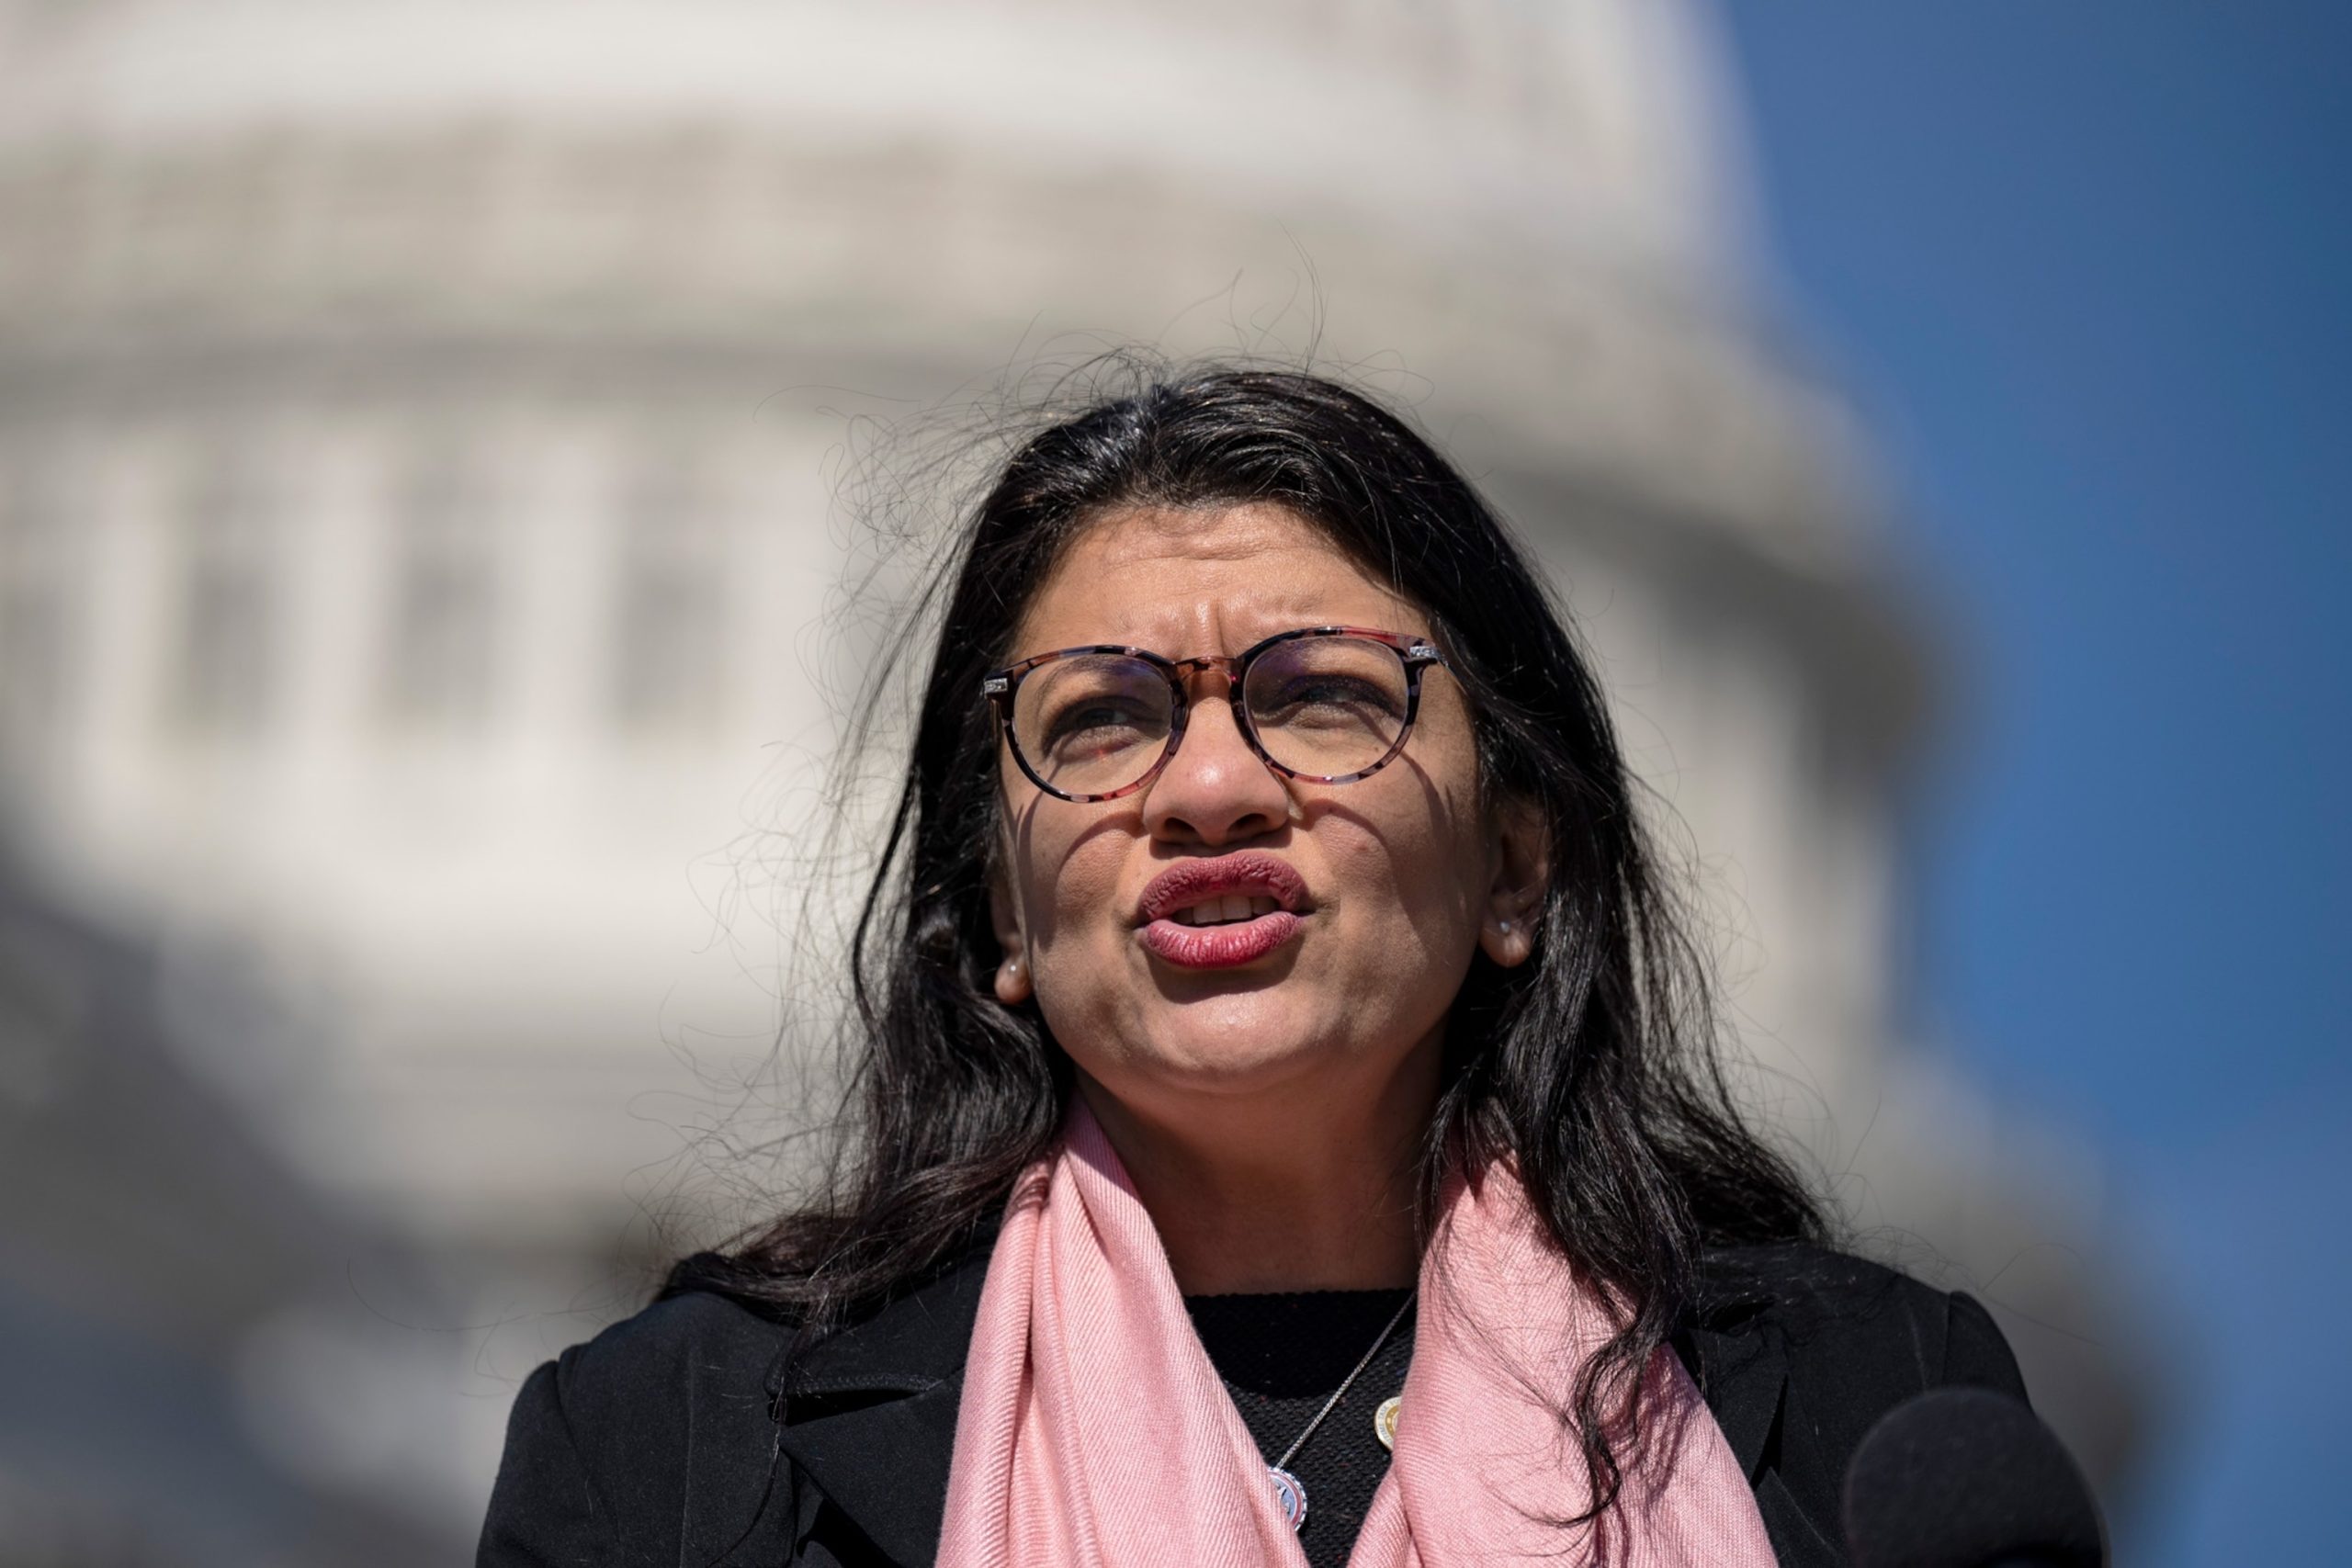 House Considers Censure of Tlaib for Criticizing Israel, Democrats Respond with Resolution against Marjorie Taylor Greene